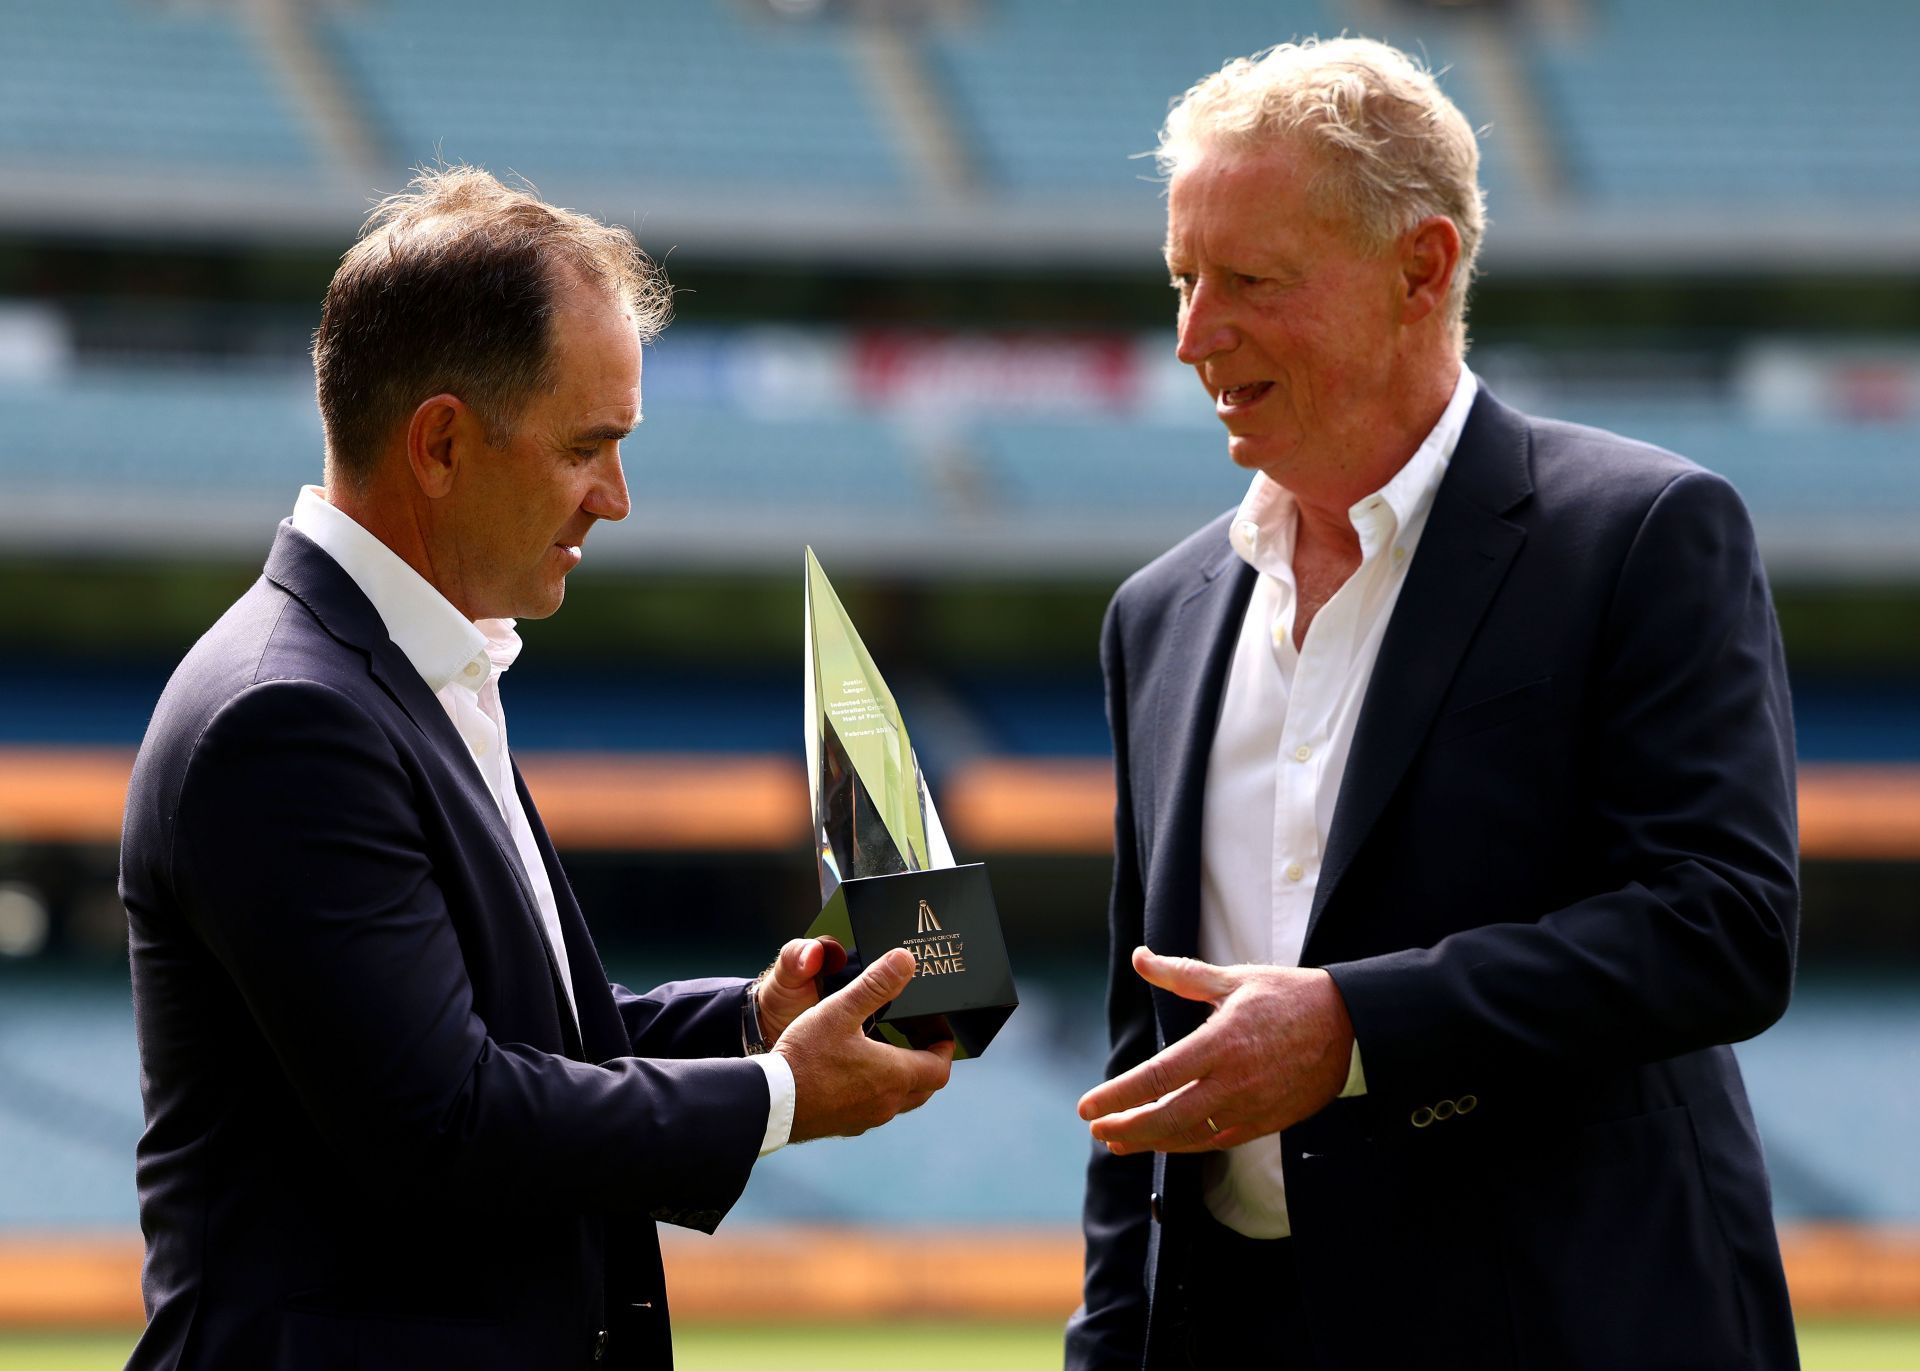 Justin Langer was inducted into the Hall Of Fame at the iconic MCG